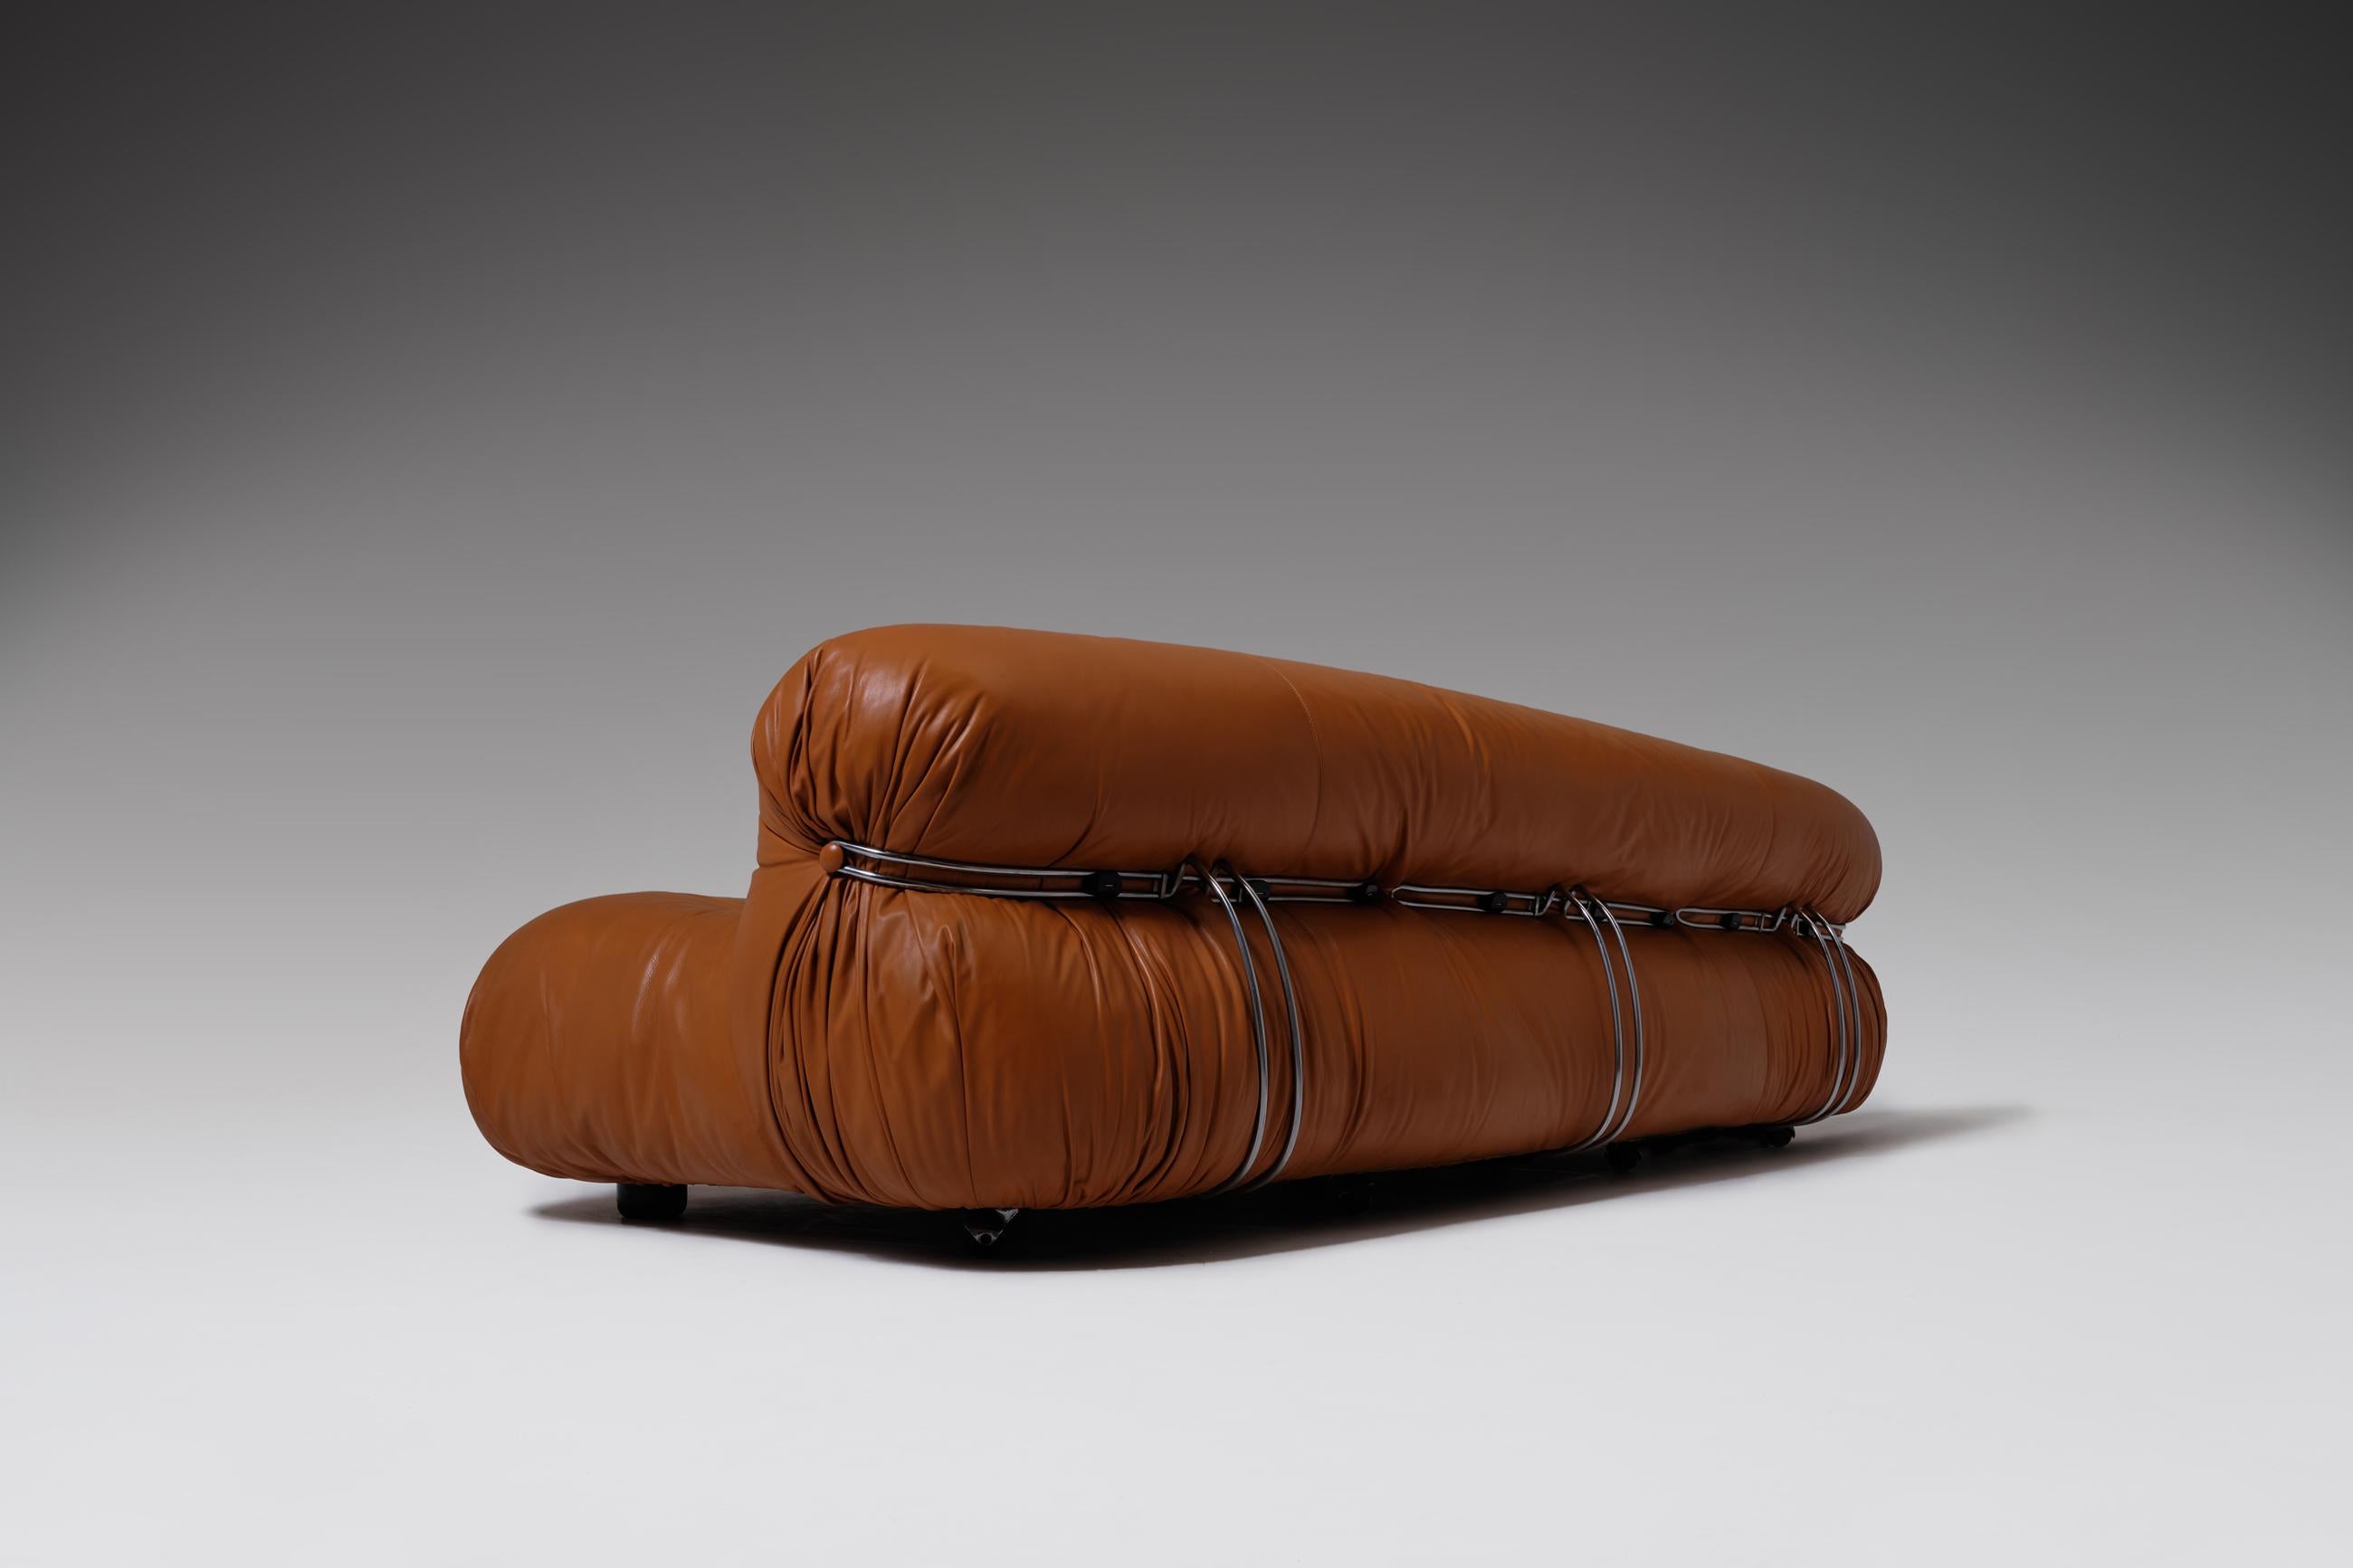 20th Century Soriana Three-Seat Sofa in Cognac Leather by Afra & Tobia Scarpa, Italy, 1969